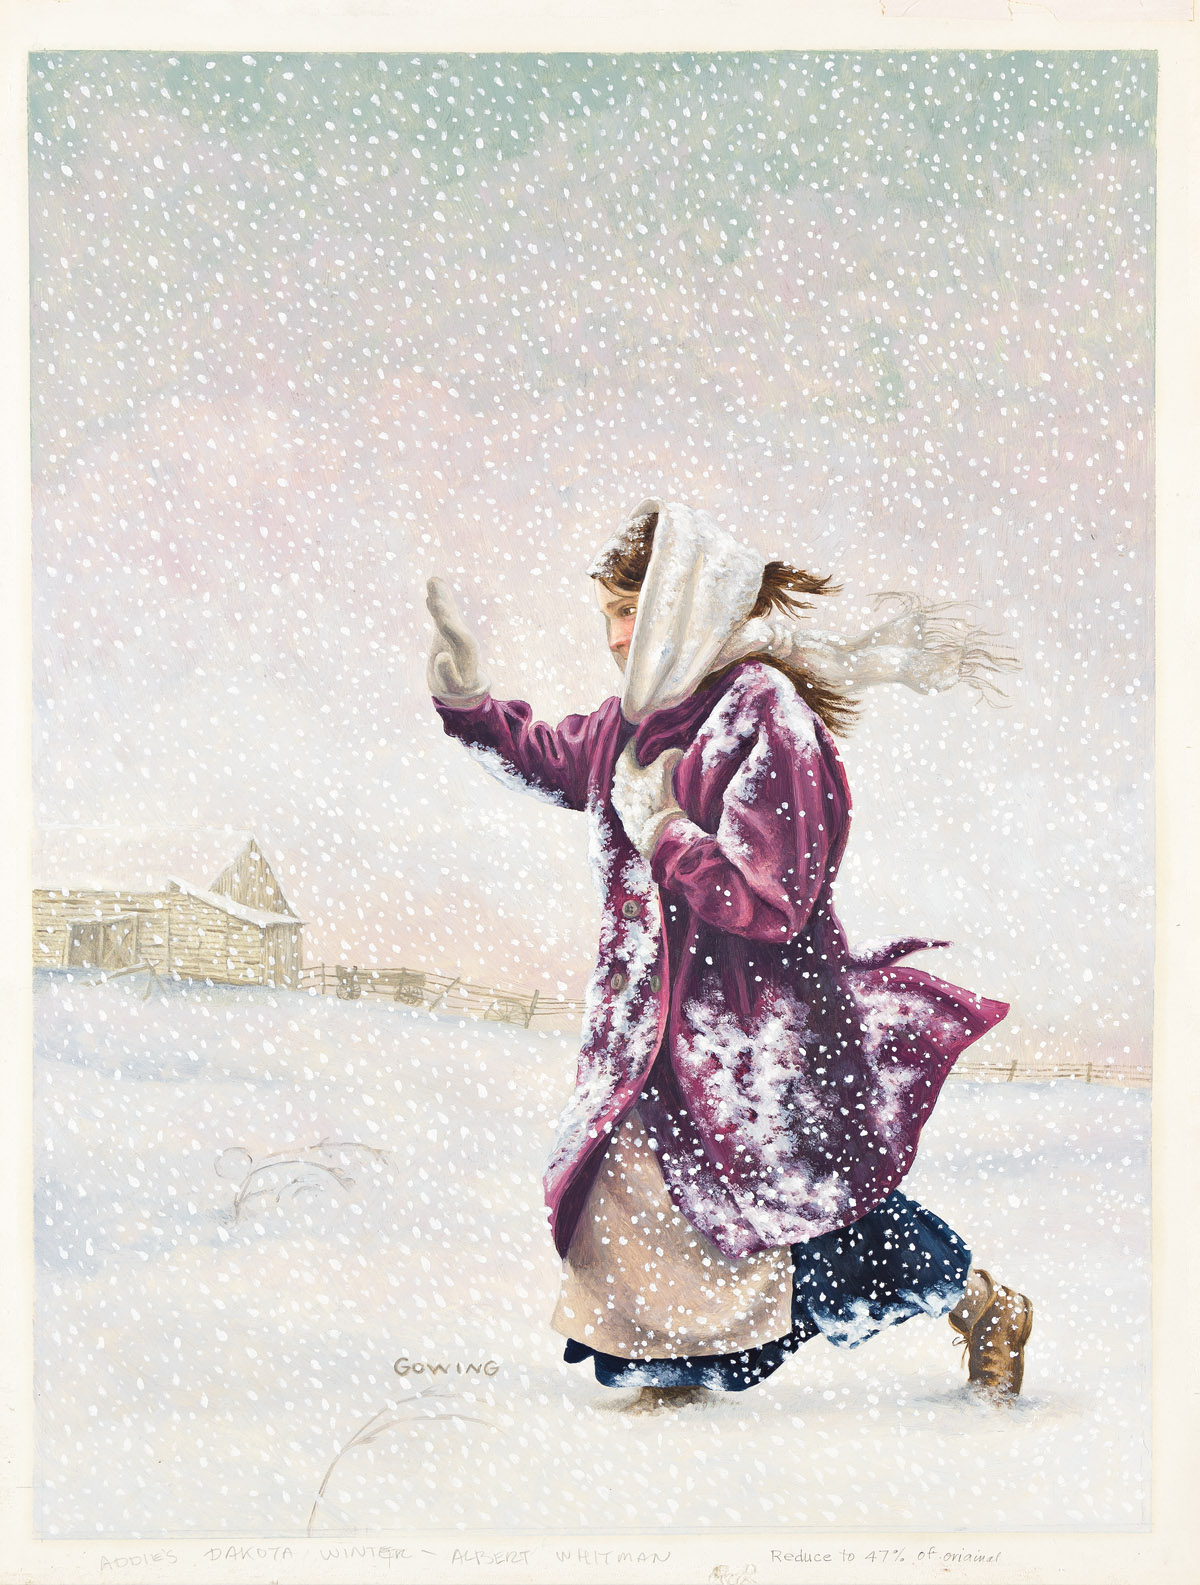 TOBY GOWING (20TH CENTURY) Addie in the snow.